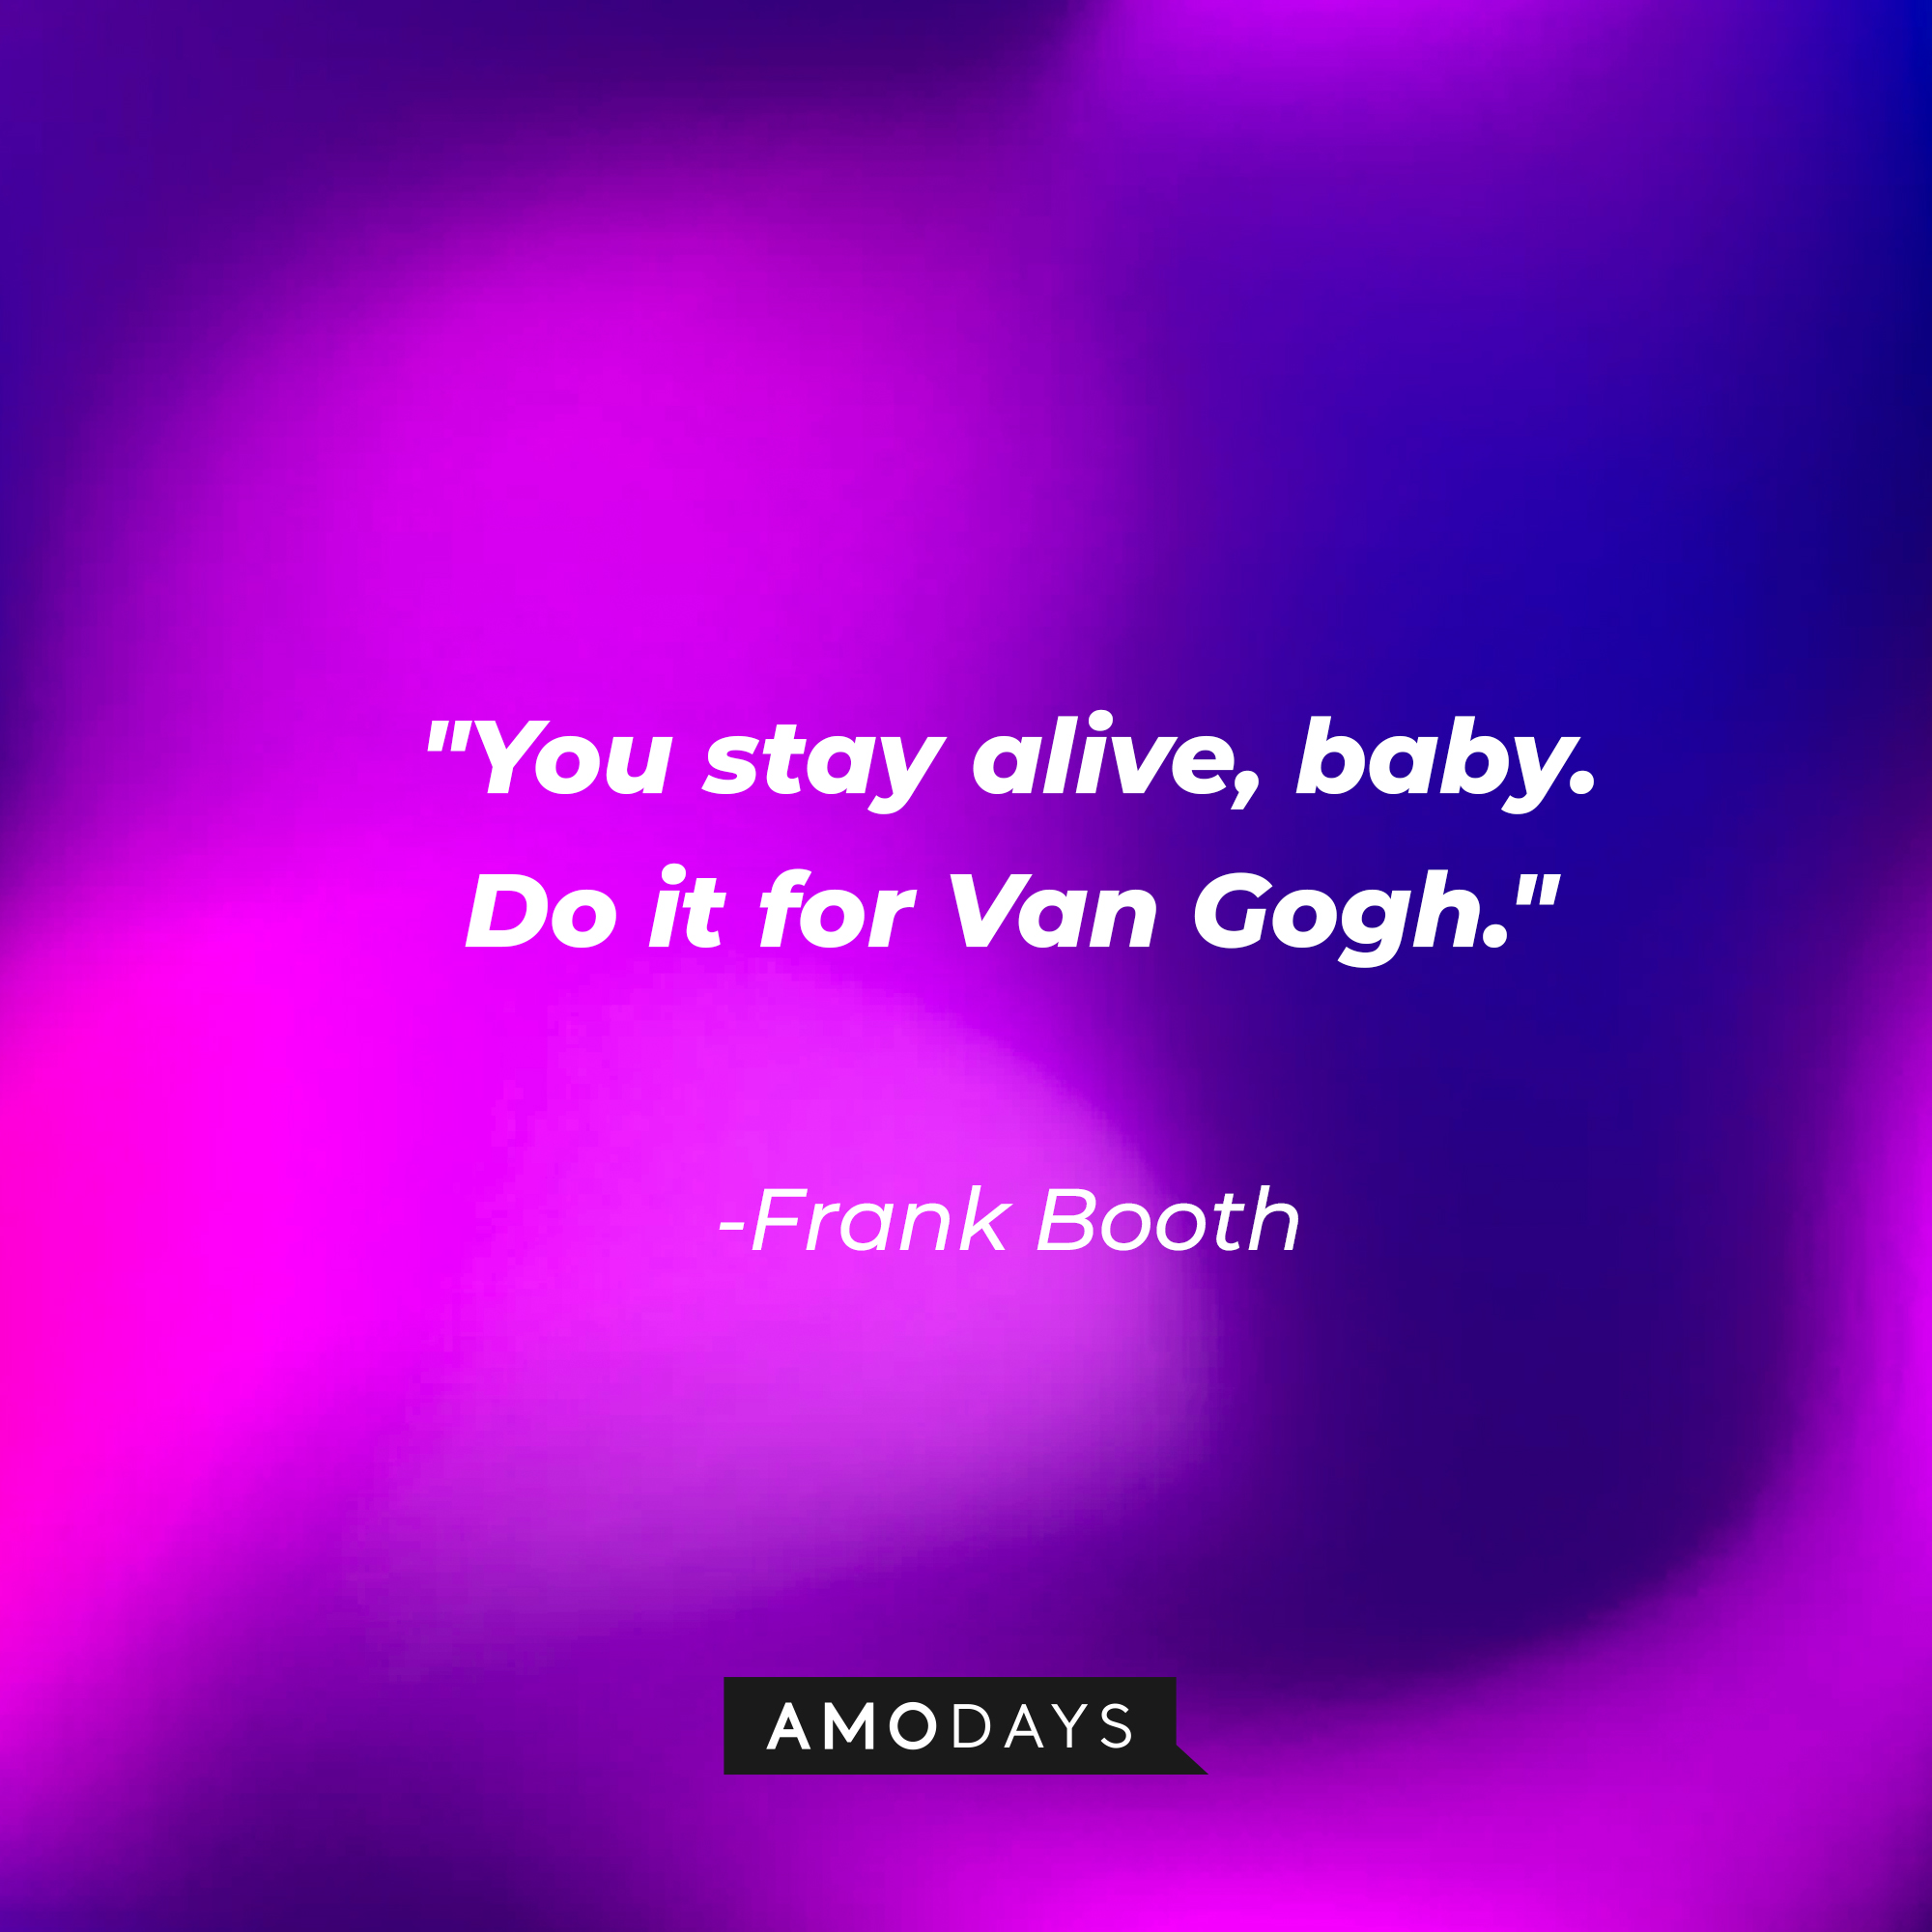 Frank Booth with his quote: "You stay alive, baby. Do it for Van Gogh." | Source: facebook.com/BlueVelvetMovie